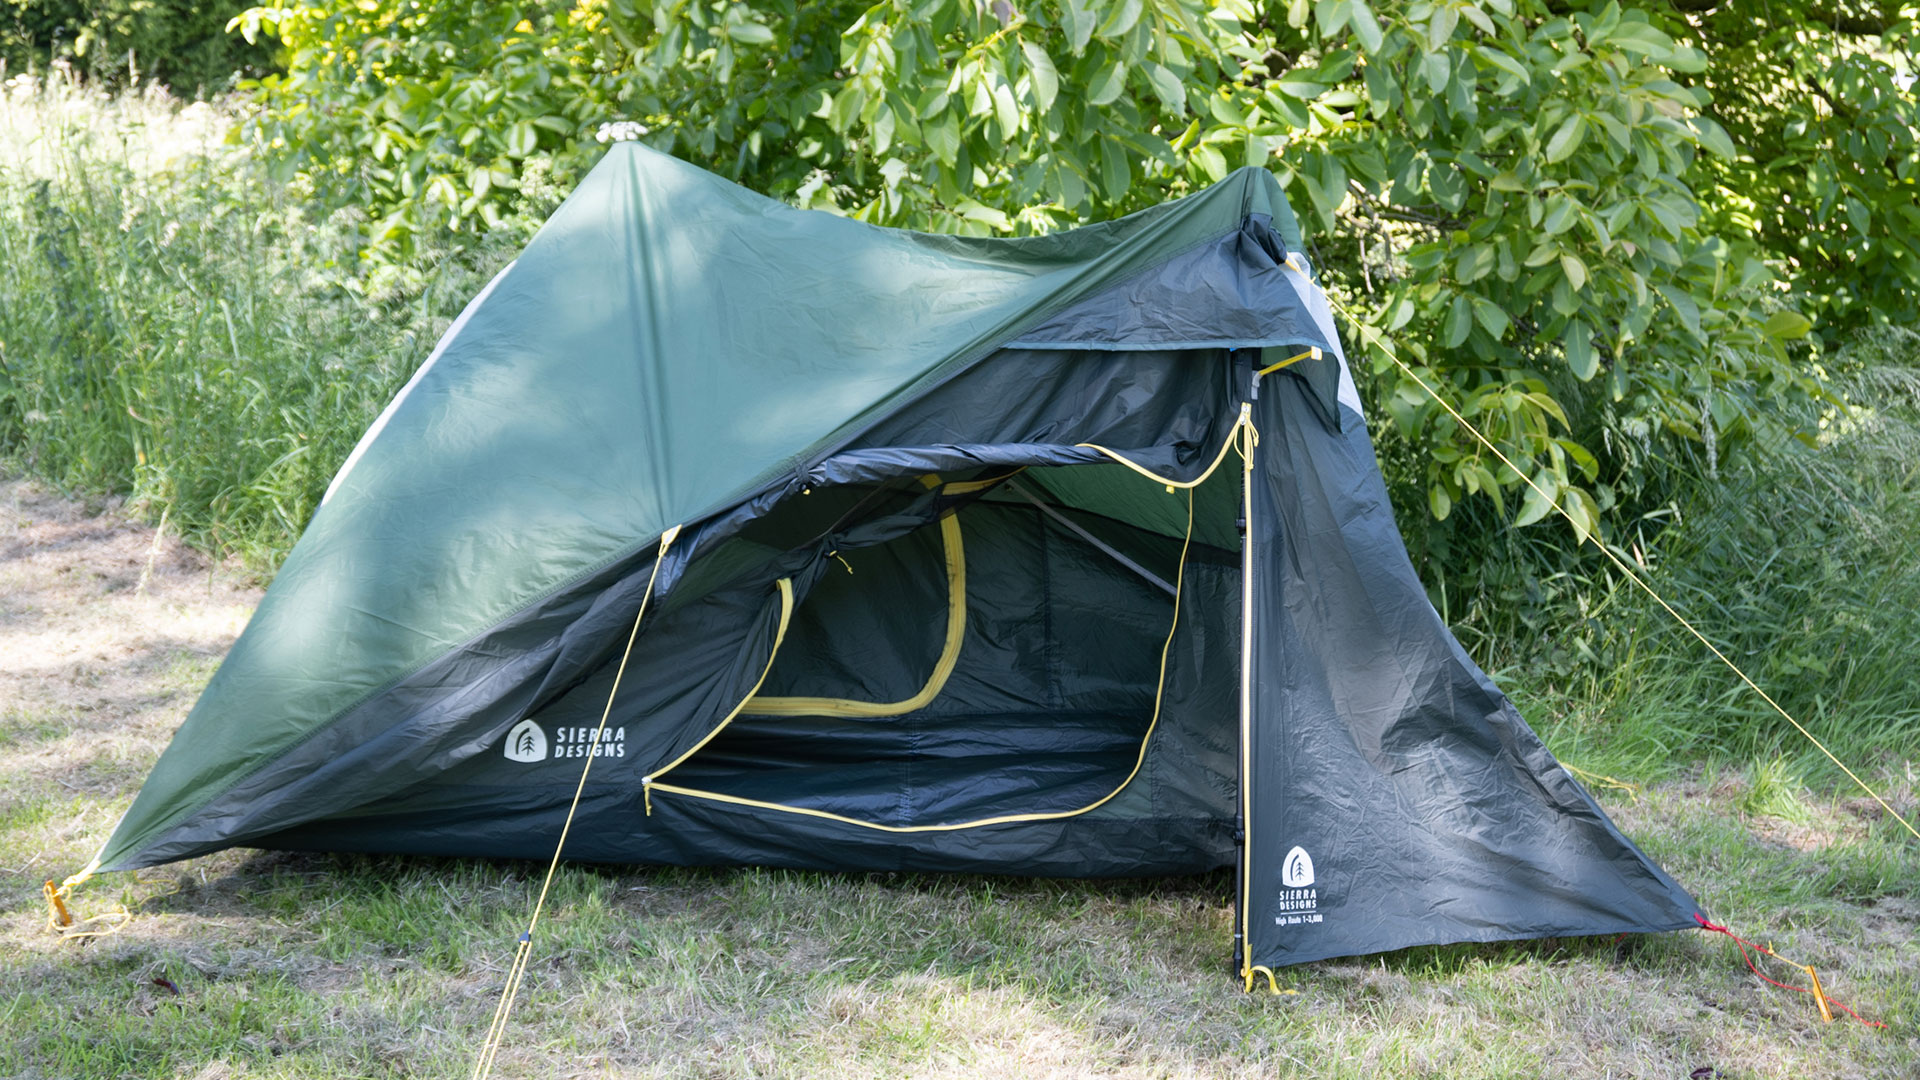 Sierra Designs High Route 1 3000 1P tent review